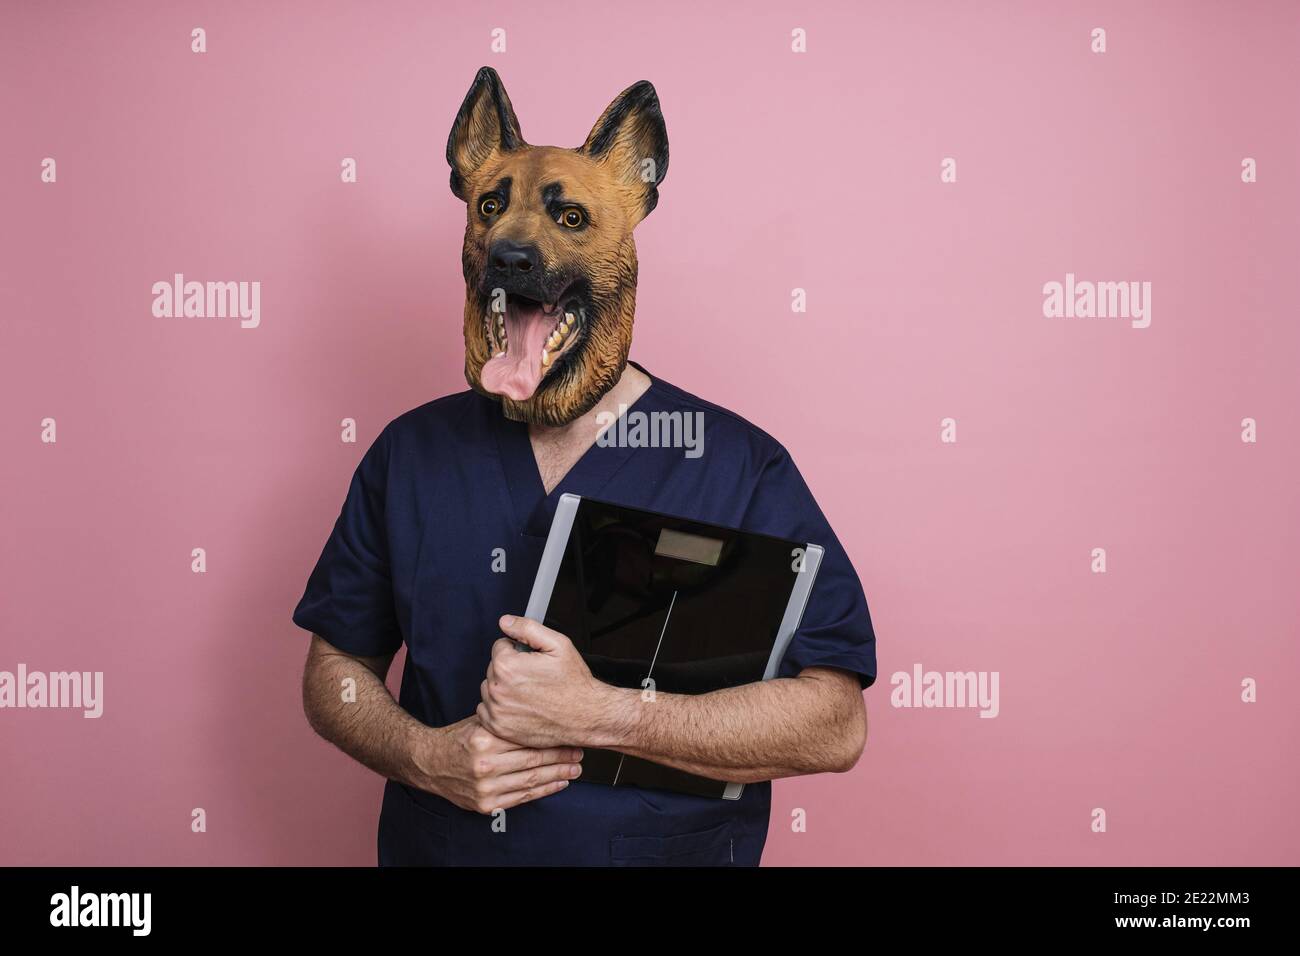 Young man in a latex dog head mask holding a weight scale on a pink  background Stock Photo - Alamy